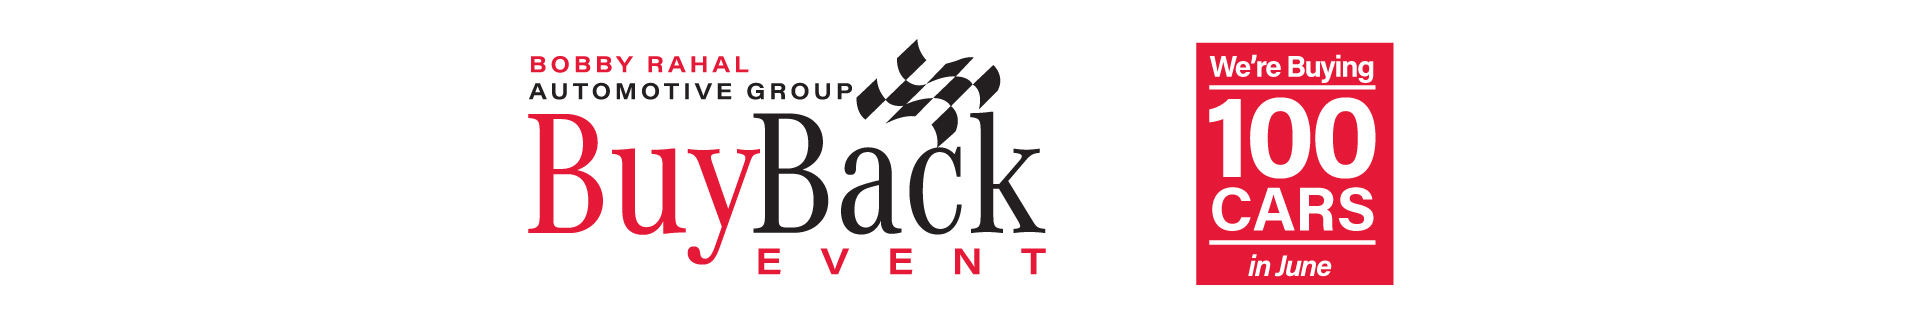 Bobby Rahal Automotive Group BUY BACK EVENT | We are buying 100 cars in June!